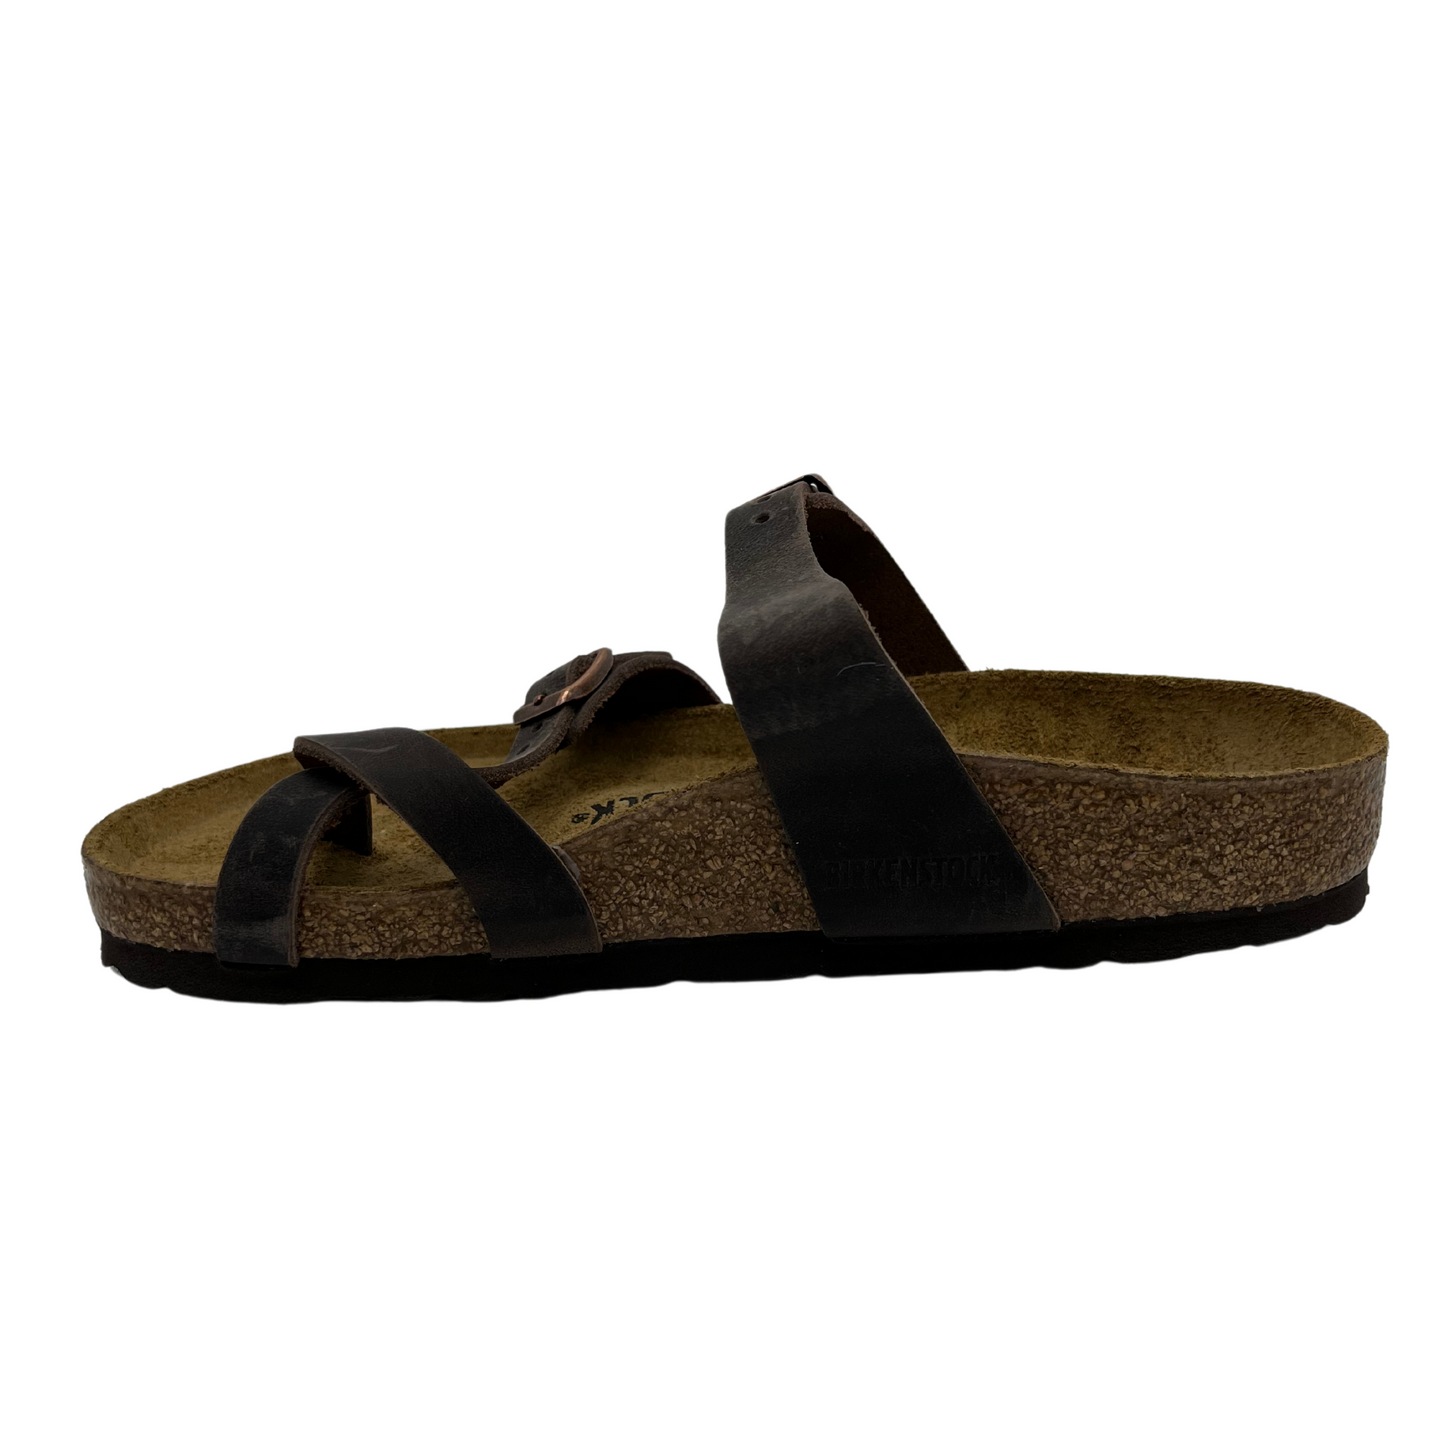 Left facing view of oiled leather strapped sandals with two pin buckle straps, suede lined contoured cork footbed